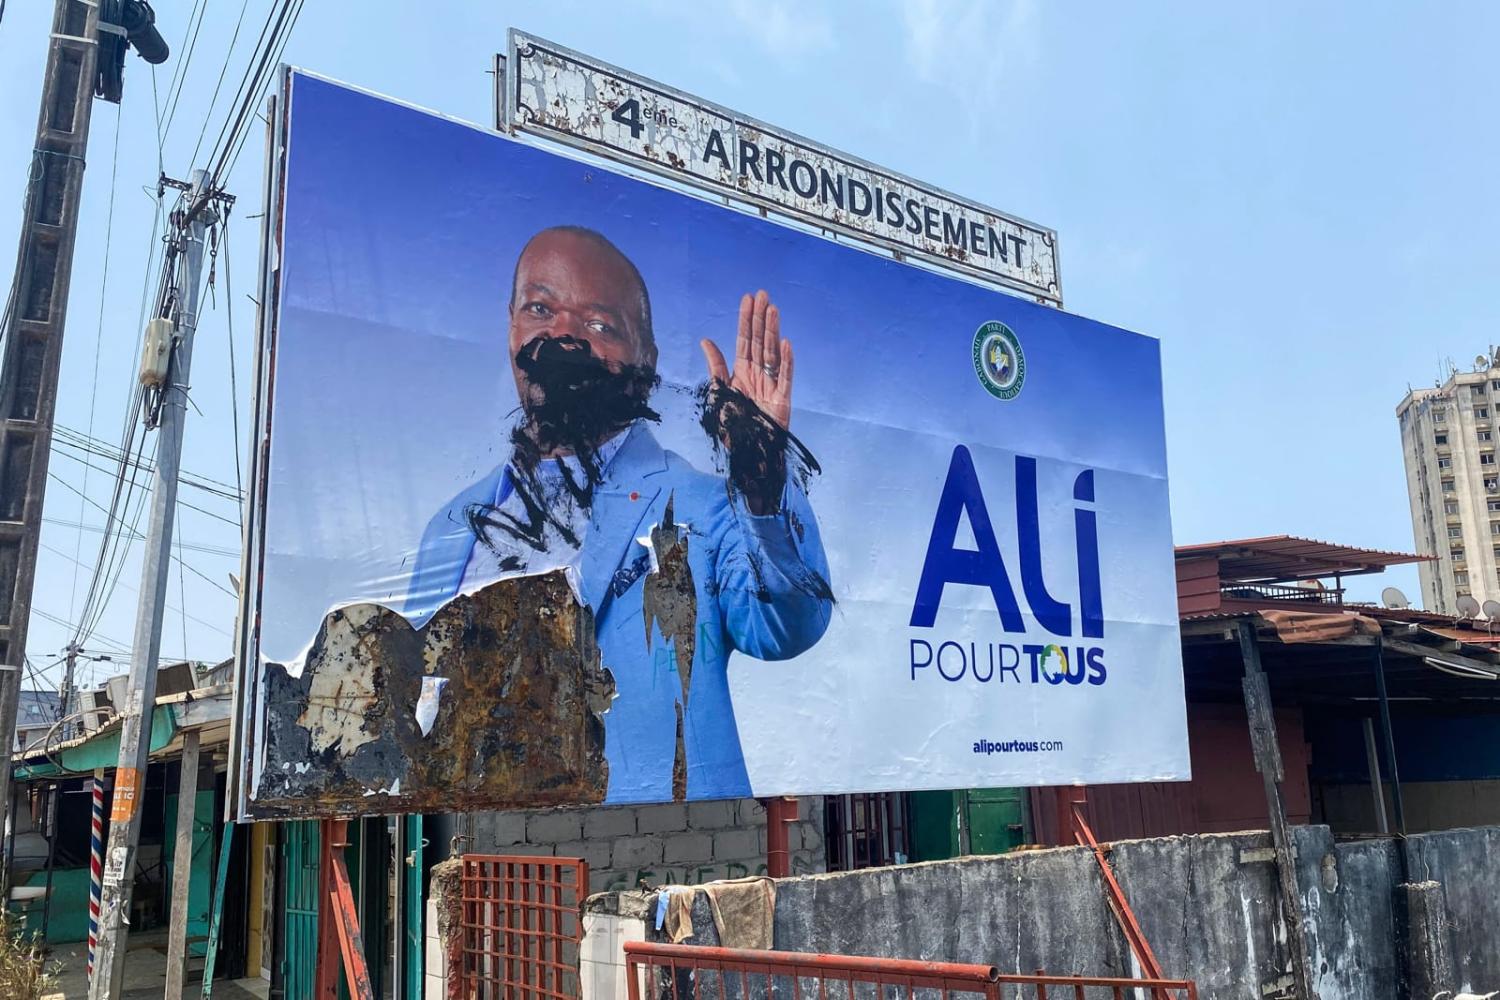 A defaced campaign billboard of ousted Gabon President Ali Bongo Ondimba in Libreville following the coup last week (AFP via Getty Images)